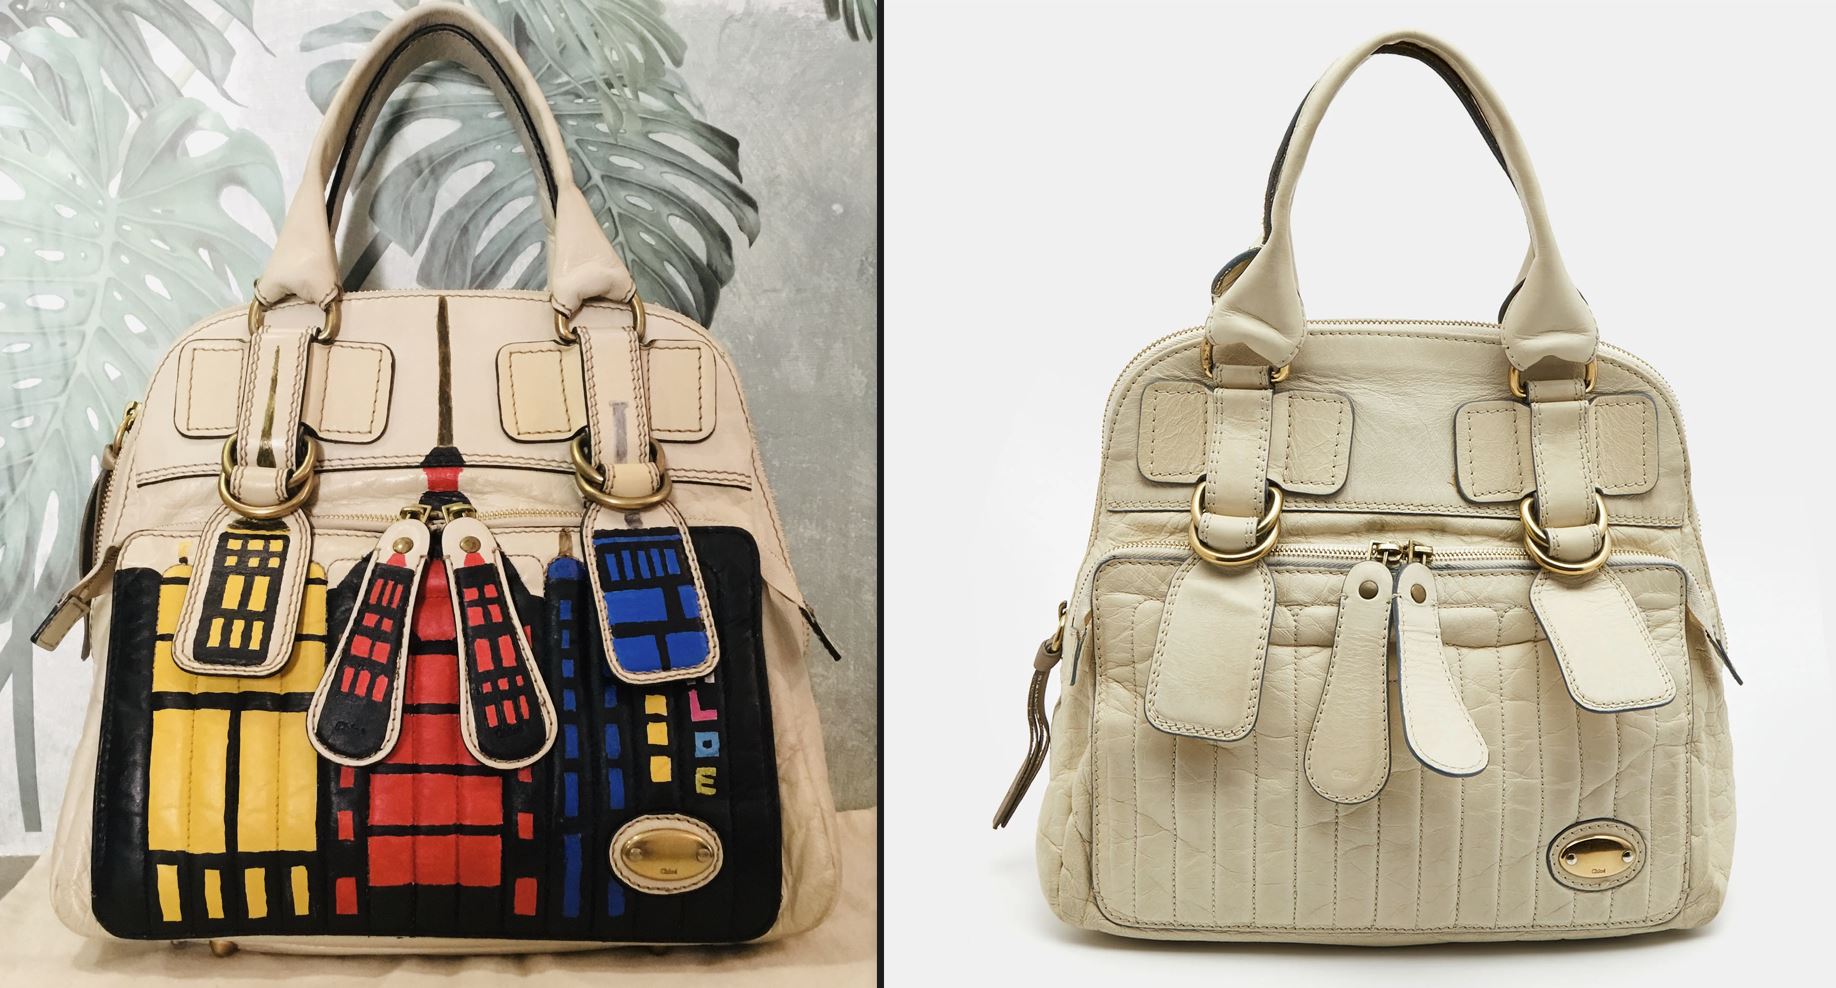  Left: upcycled Chloe Quilted Leather Tote Shoulder bag. Photo: Silvia Contarelli, 2023. Right: The same model bag, shown for comparison. Photo from eBay, used under Fair Use for educational/critical purposes.